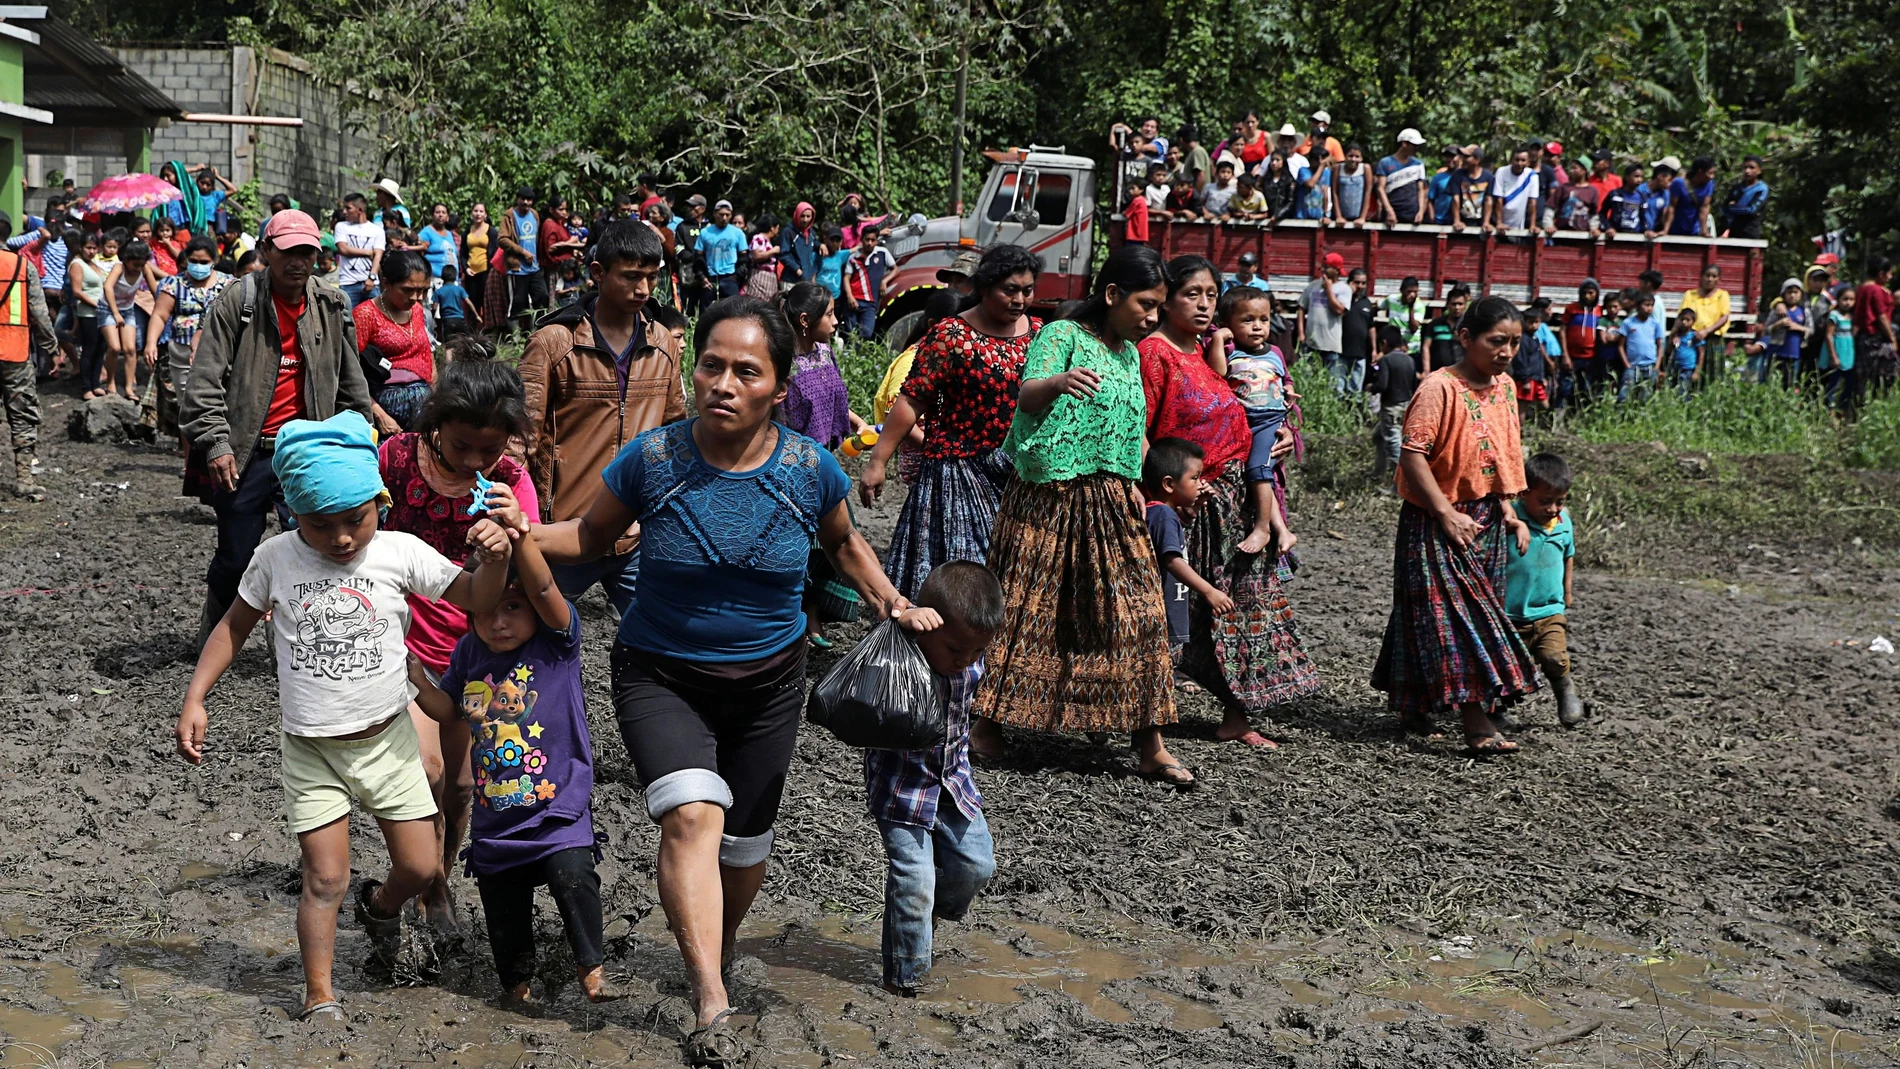 People walk at a school area that is being used as a temporary shelter for residents of neighbouring villages affected by the mudslides, due to heavy rains brought by Storm Eta, in the village of Santa Elena, Alta Verapaz, Guatemala November 8, 2020. Picture taken November 8, 2020. REUTERS/Luis Echeverria